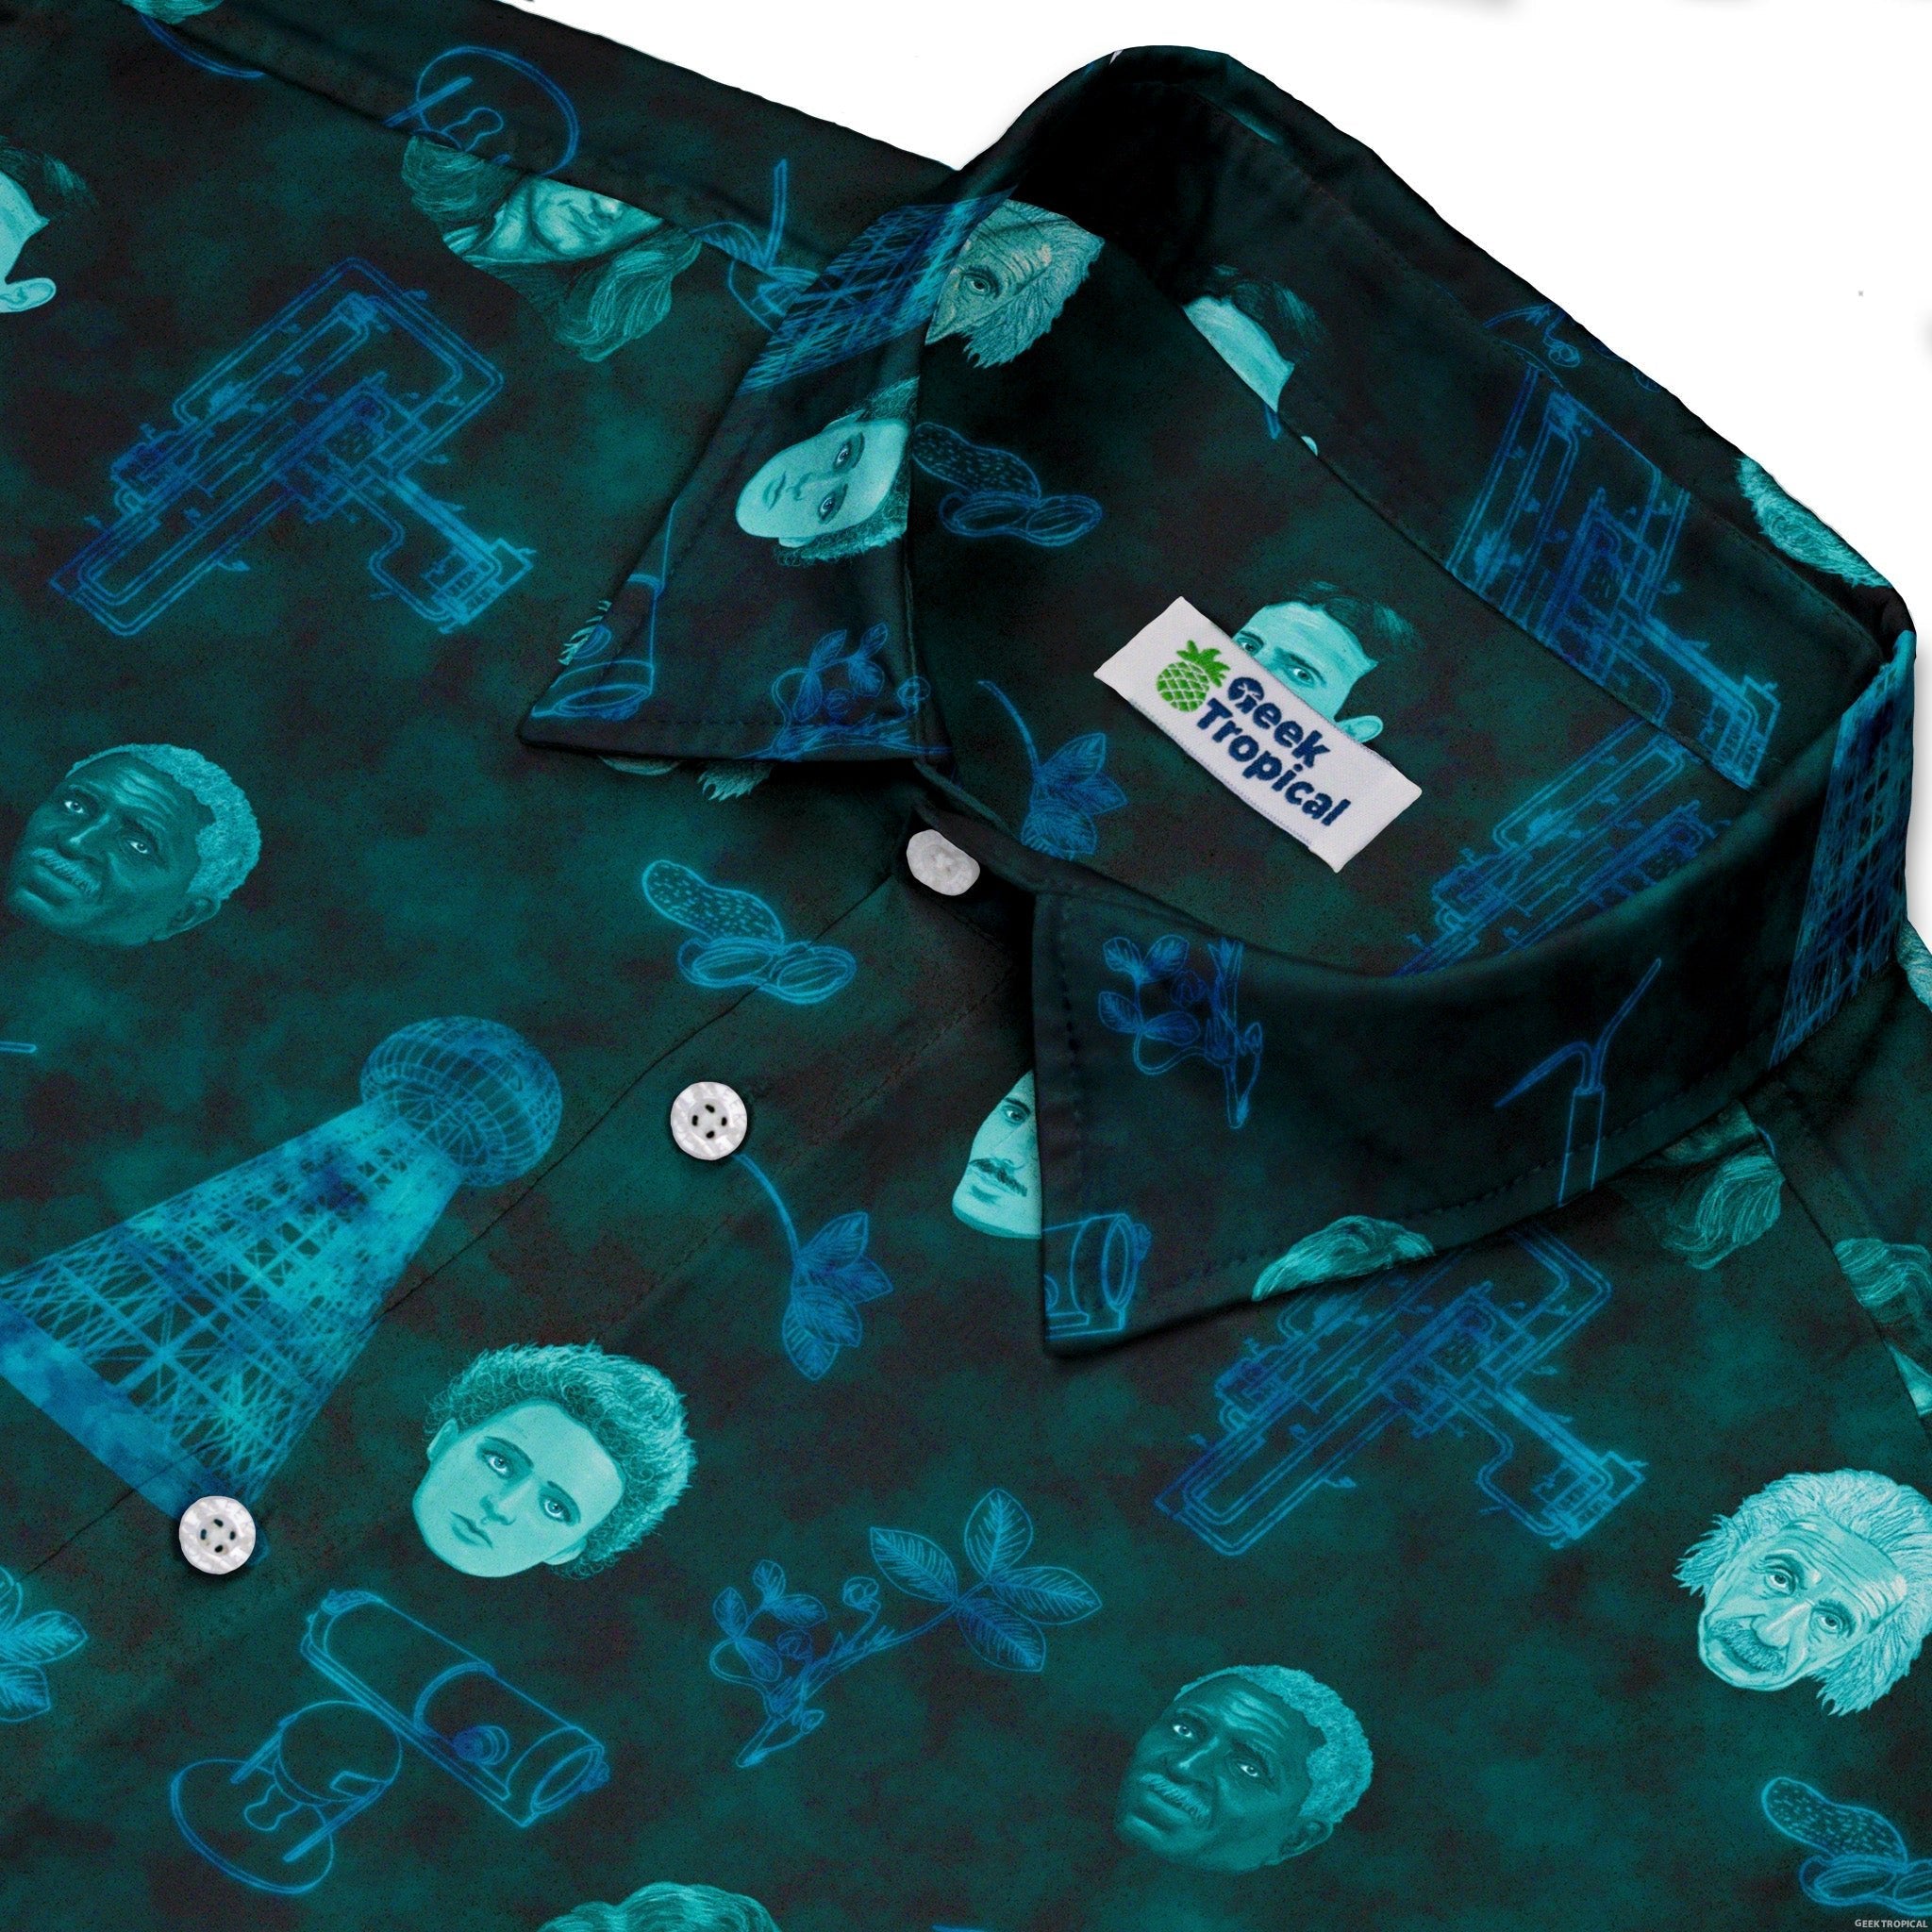 Eerie Science Legends Button Up Shirt - adult sizing - Designs by Nathan - science print